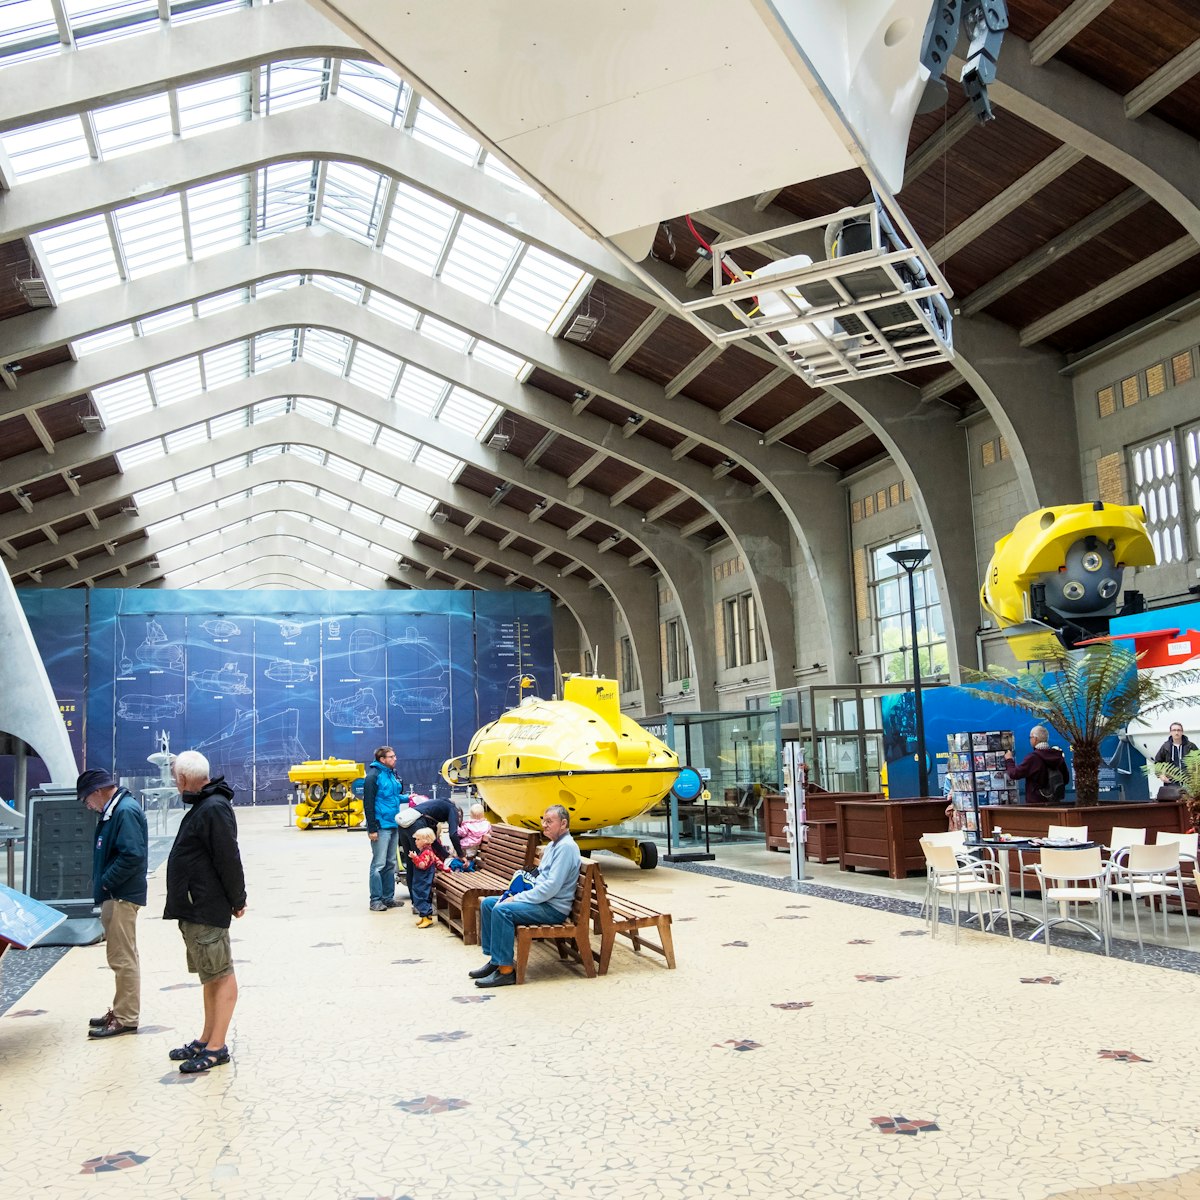 The Great Hall with famous bathyscaphes in the maritime museum La Cite de La Mer in Cherbourg, France.